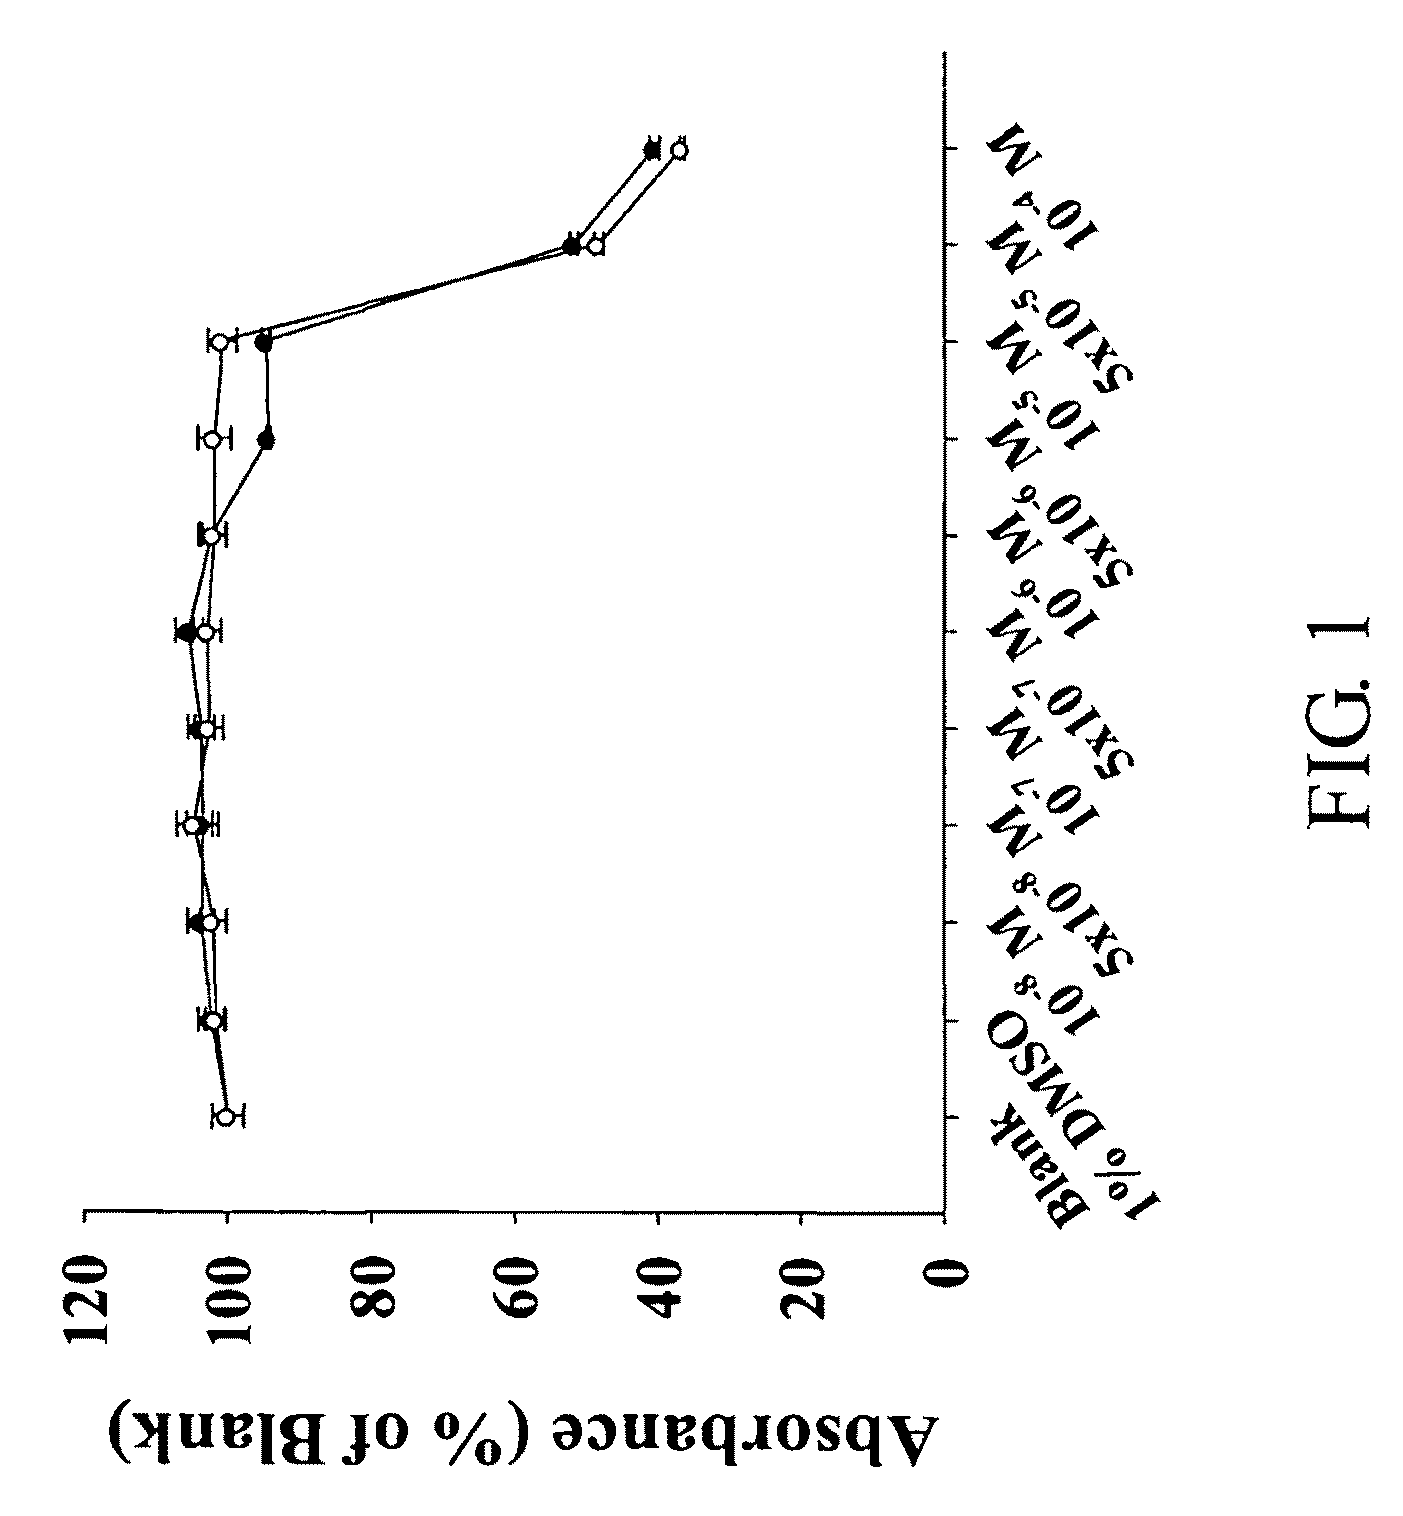 Aporphine derivatives and pharmaceutical use thereof